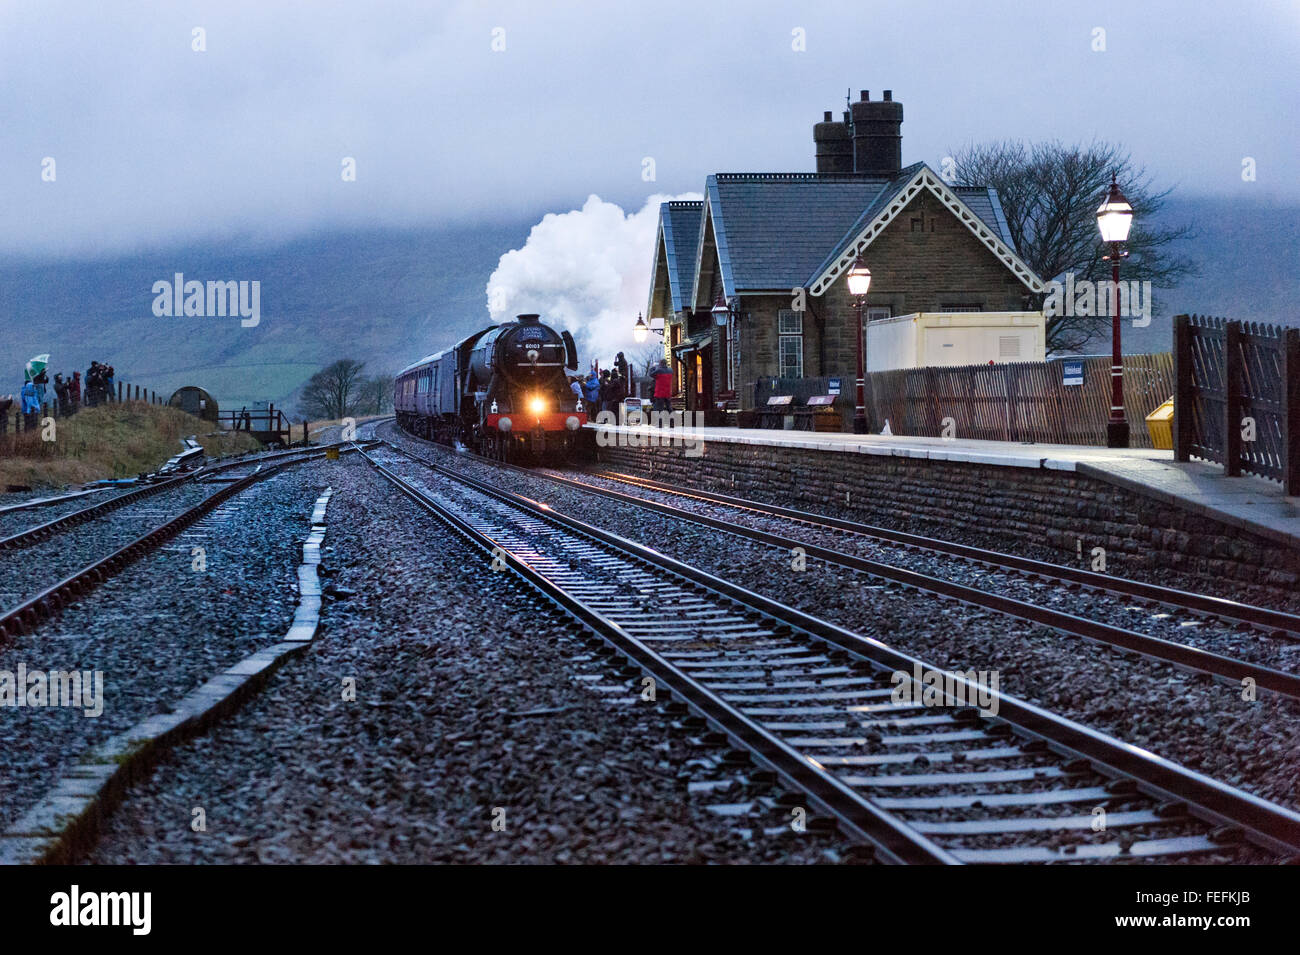 Ribblehead, North Yorkshire, UK. 6th February, 2016. The famous Flying Scotsman steam locomotive runs over the Settle-Carlisle Railway Line past Ribblehead Station, North Yorkshire, late on 6th February 2016. This is the loco's first outing on the Settle-Carlisle since its recent restoration. Stock Photo